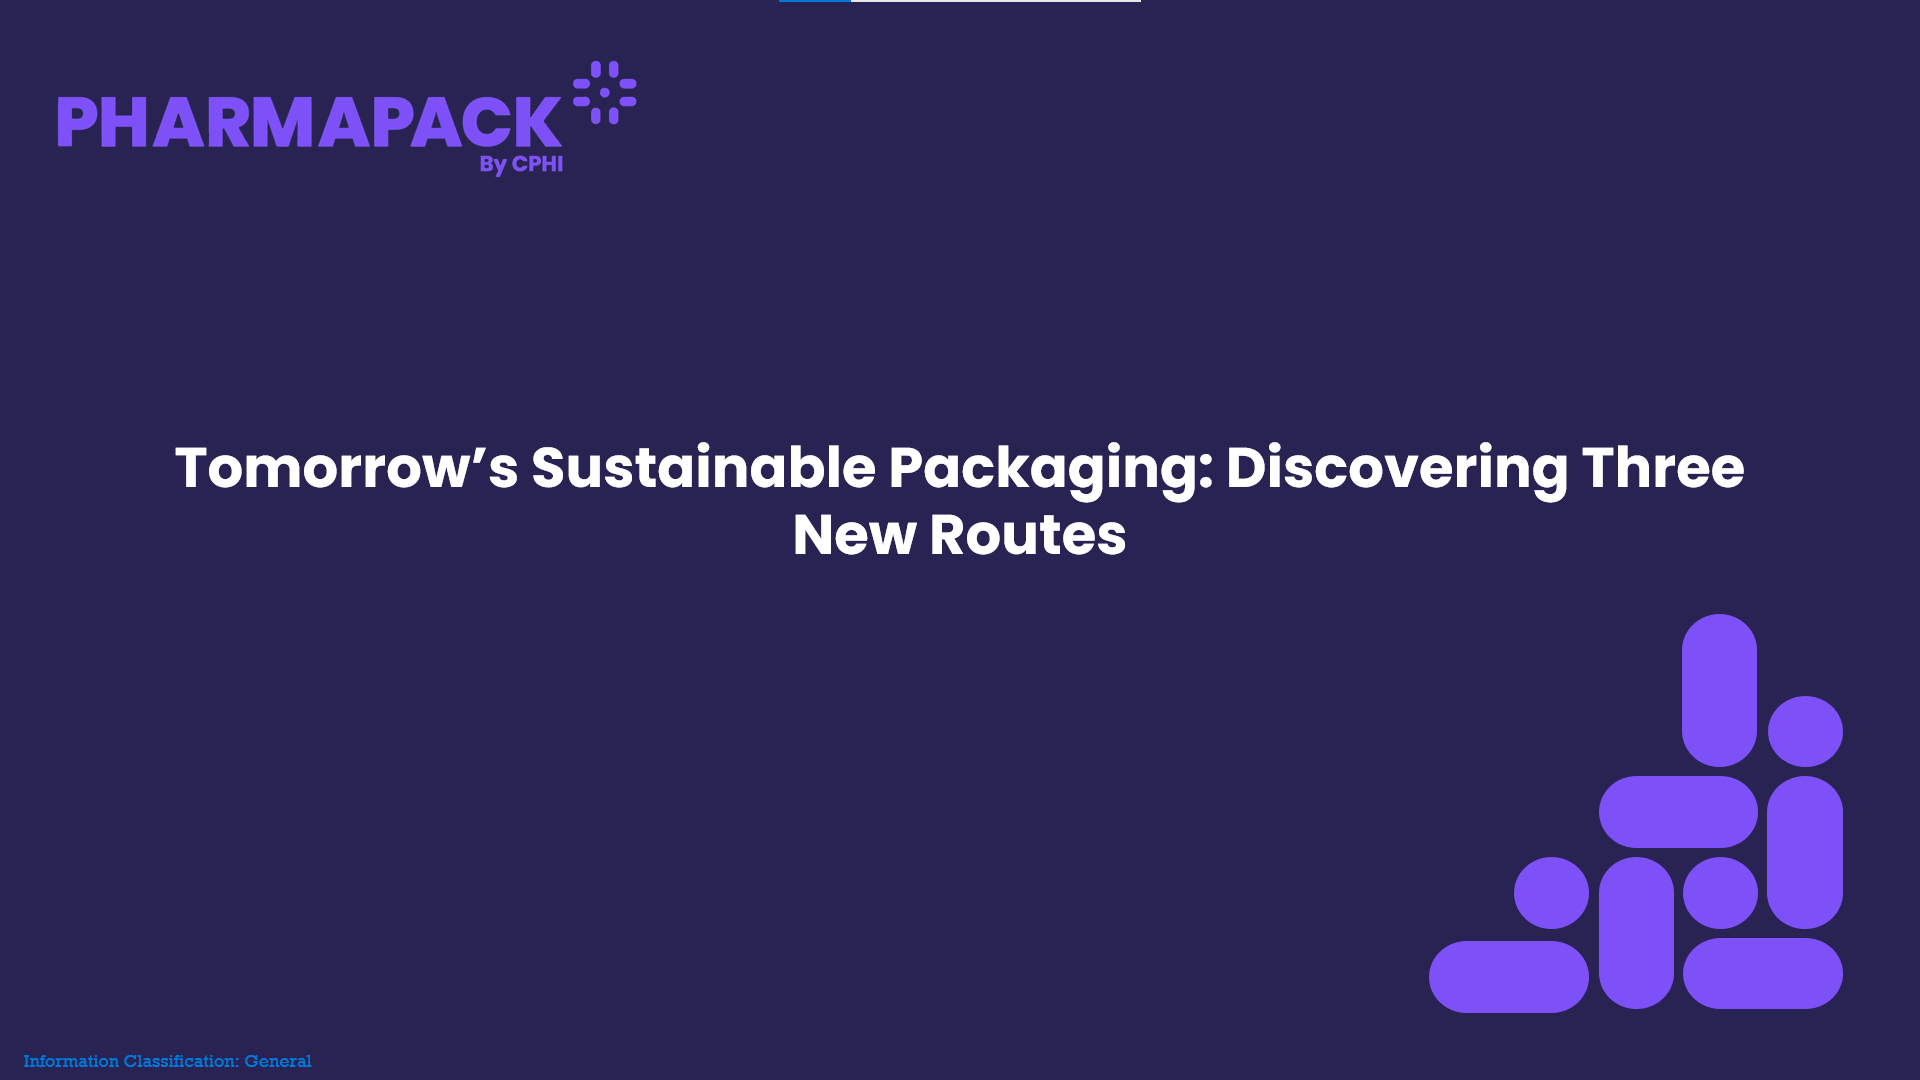 Tomorrow’s Sustainable Packaging: Discovering Three New Routes